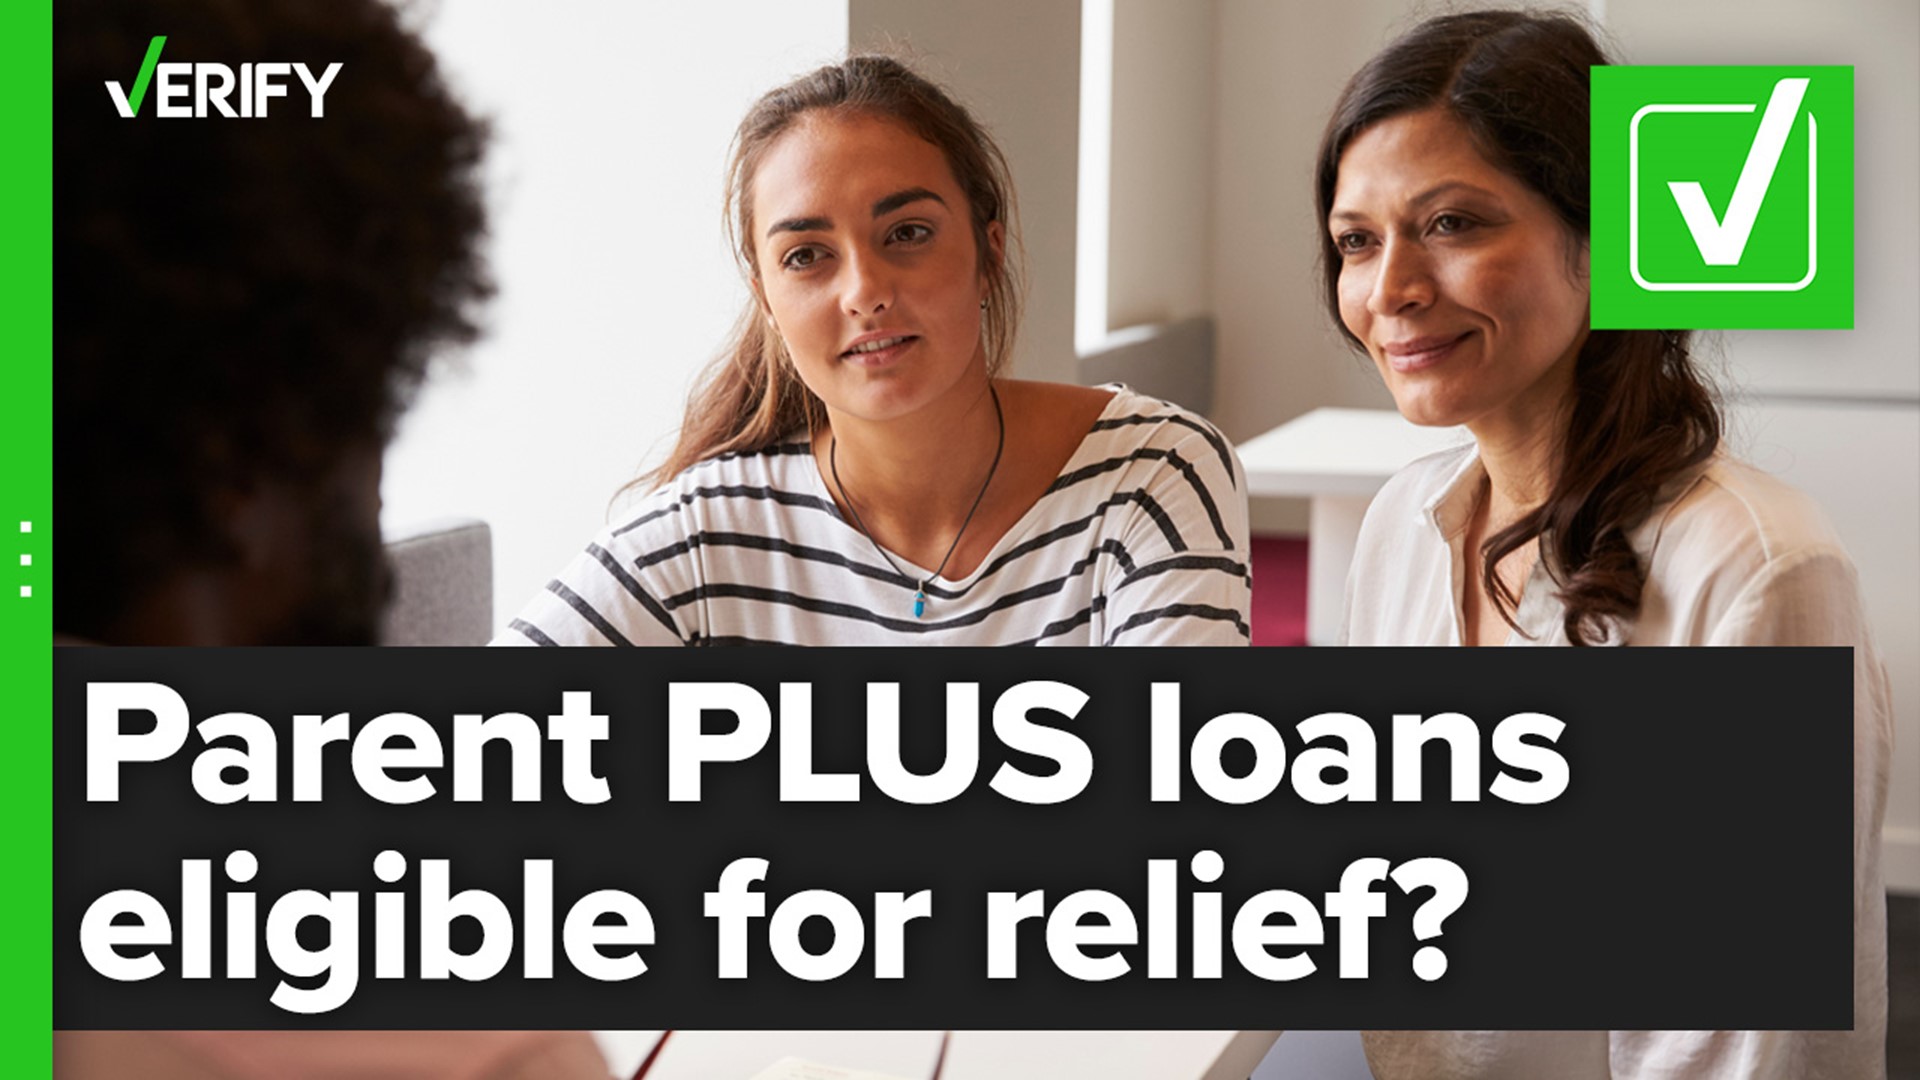 We answer common questions from VERIFY readers about how the Biden administration’s student debt forgiveness plan applies to Parent PLUS loans.